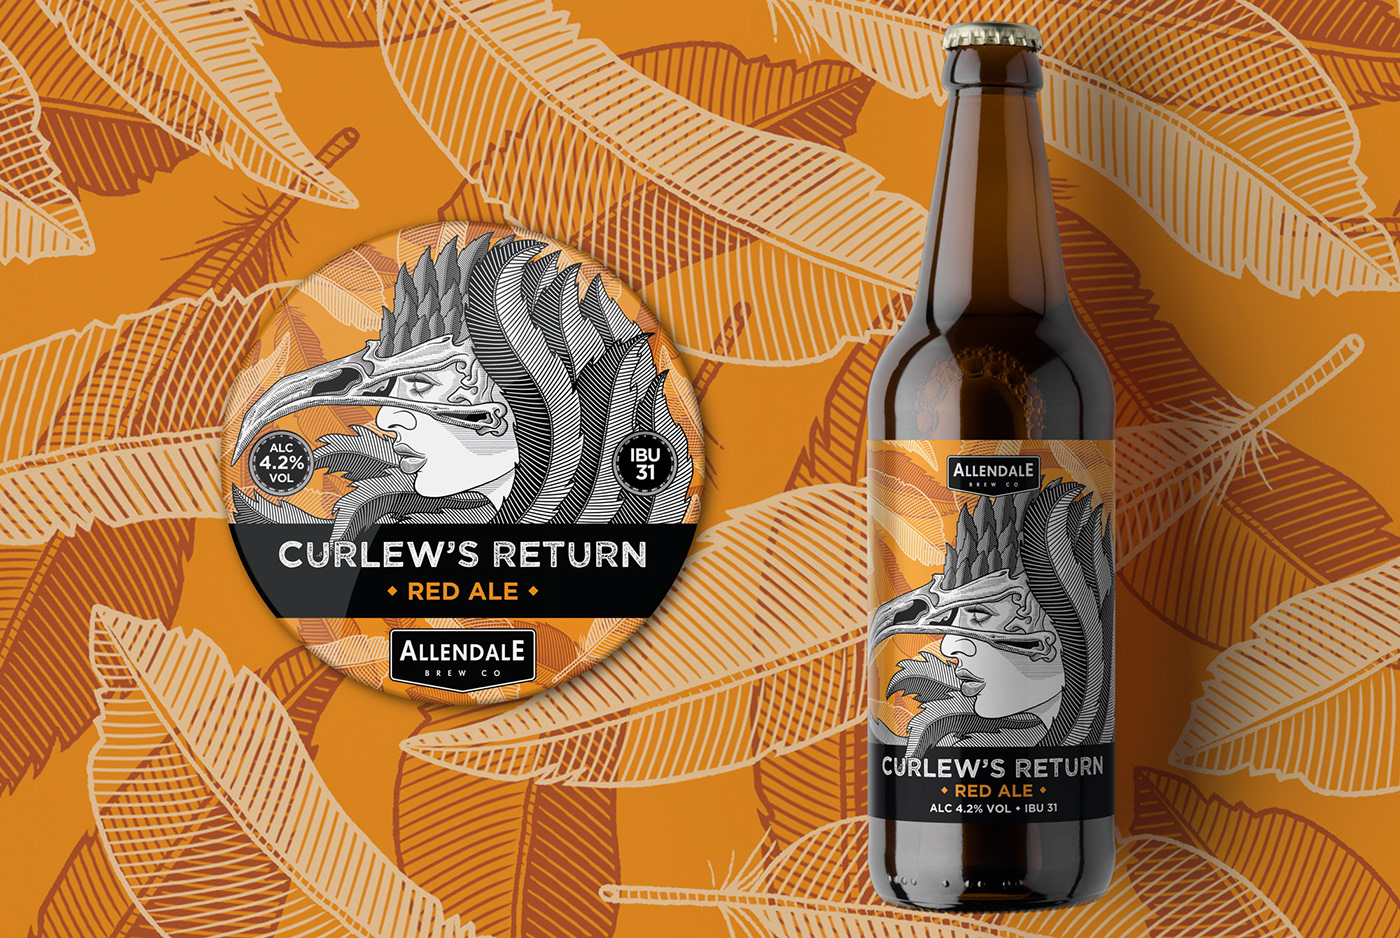 craft beer label design featuring hand-drawn woman's face wearing bird skull mask with feathers